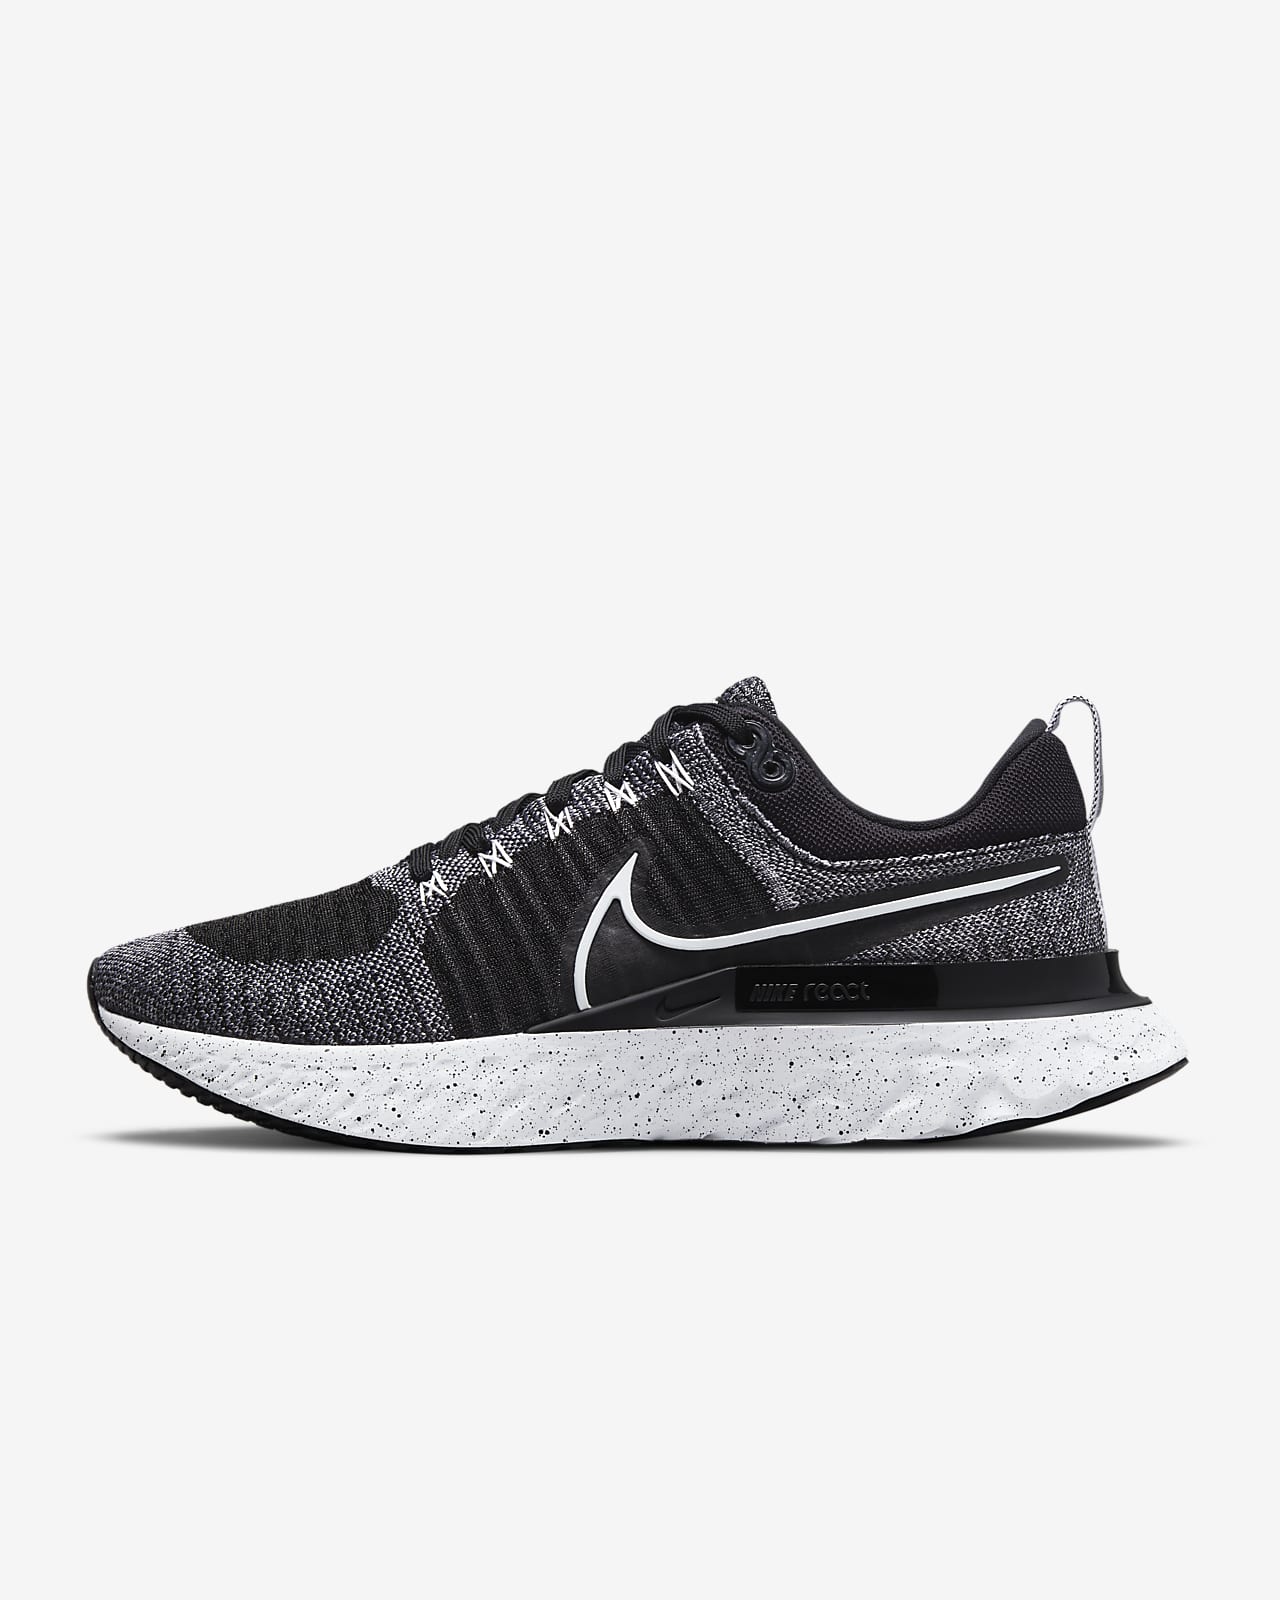 Chaussure de running sur route Nike React Infinity 2 pour homme